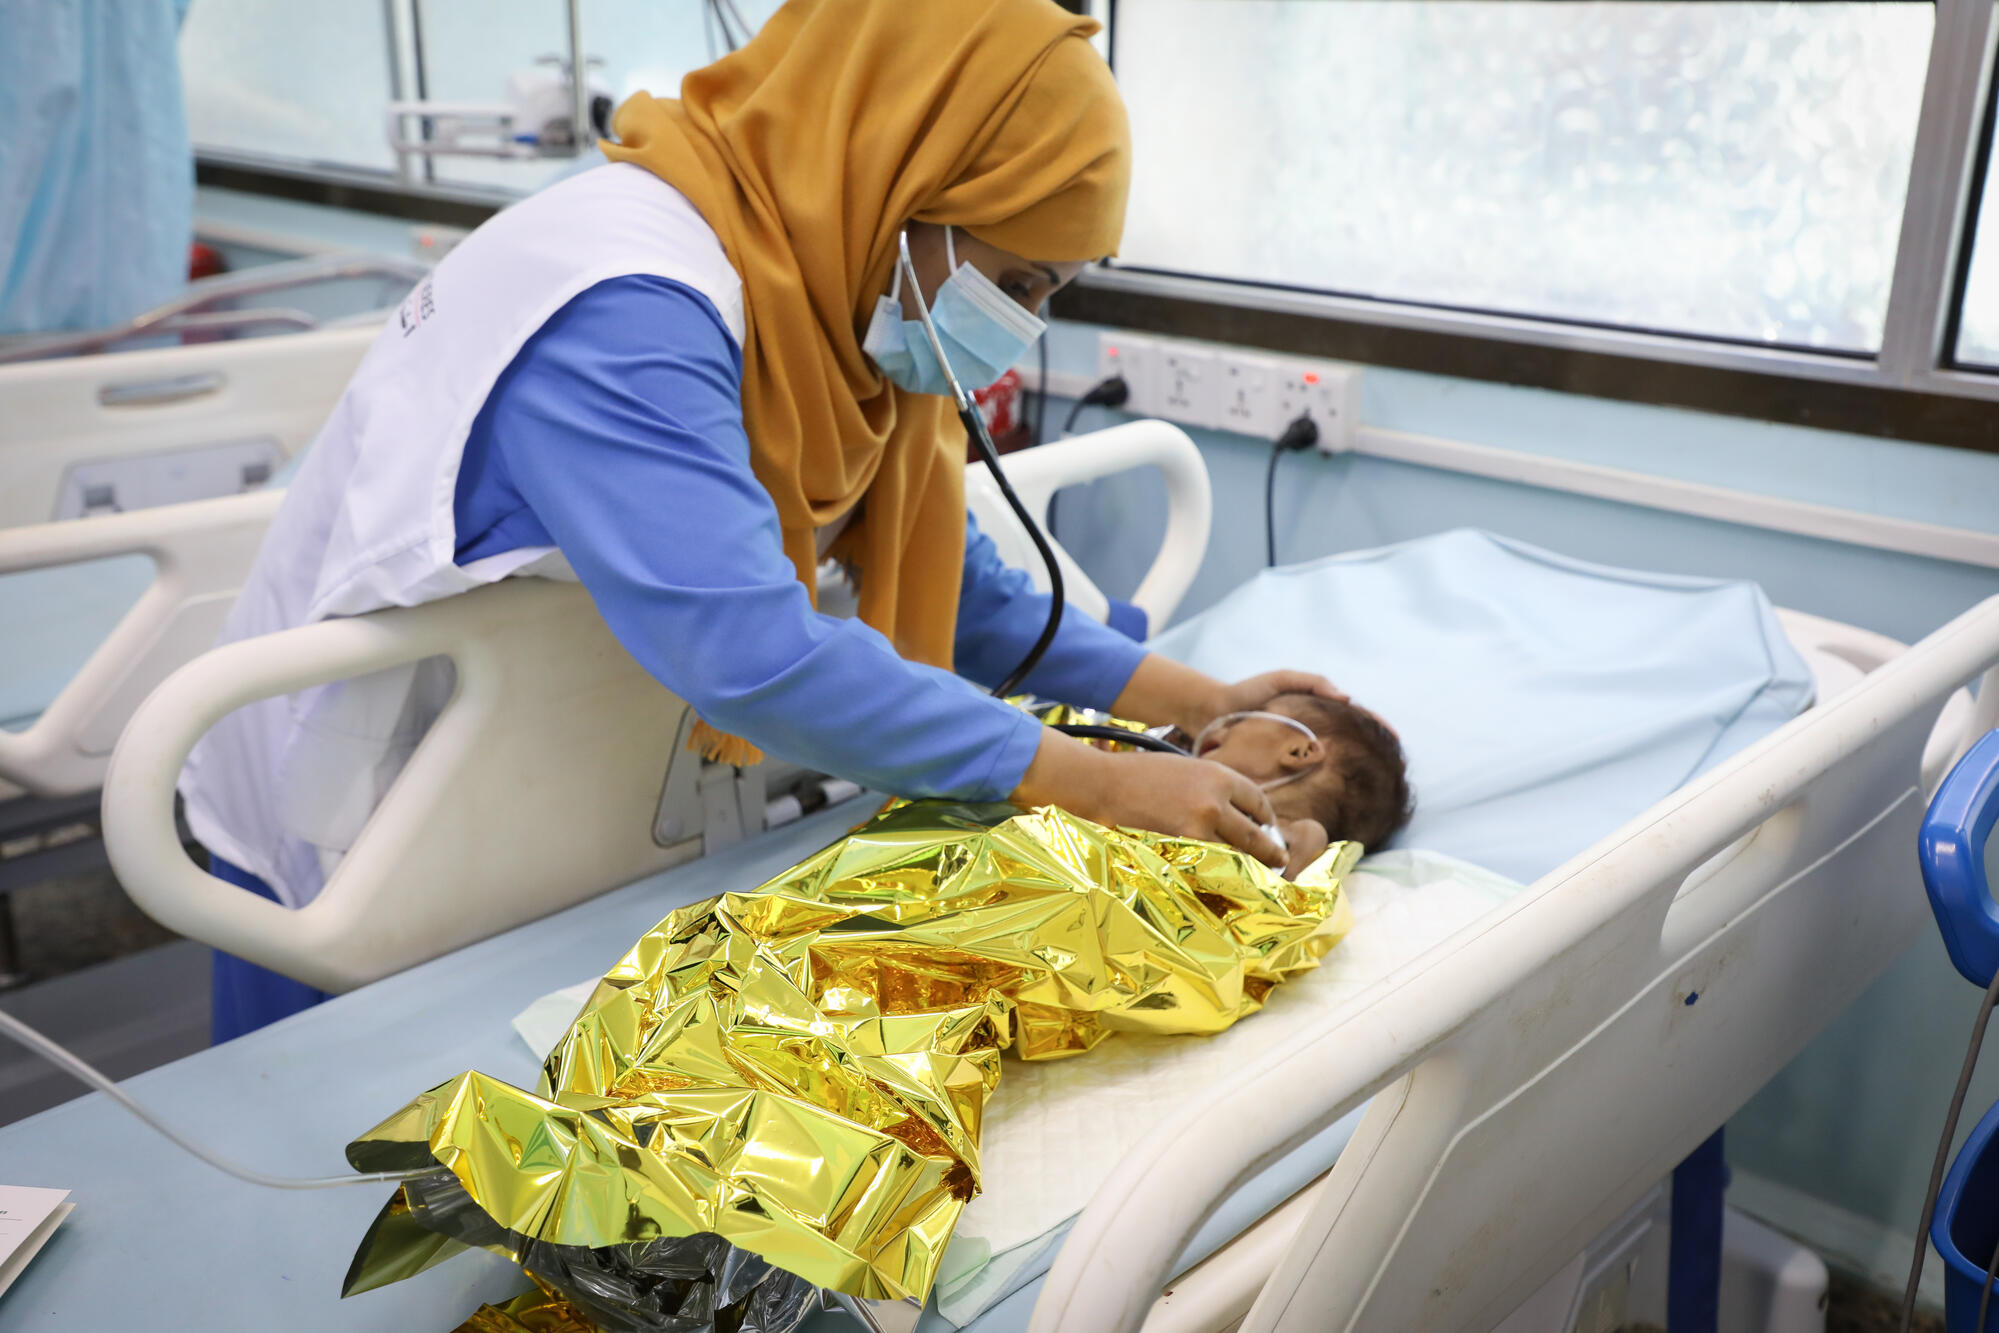 Yemen Crisis: Help us get essential care to the most vulnerable